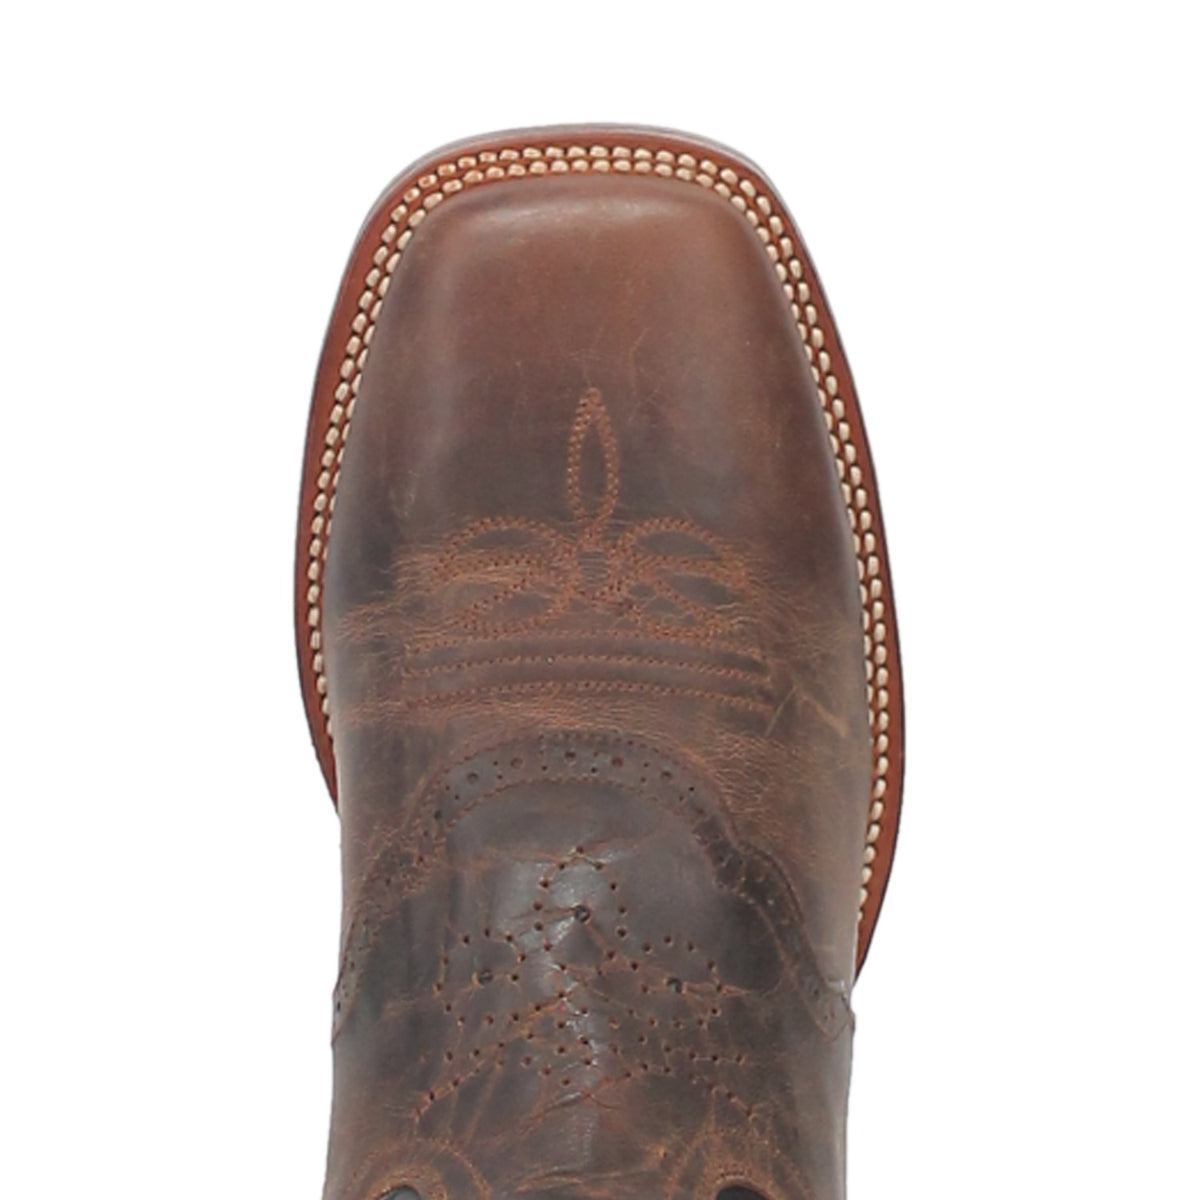 FRANKLIN LEATHER BOOT Cover